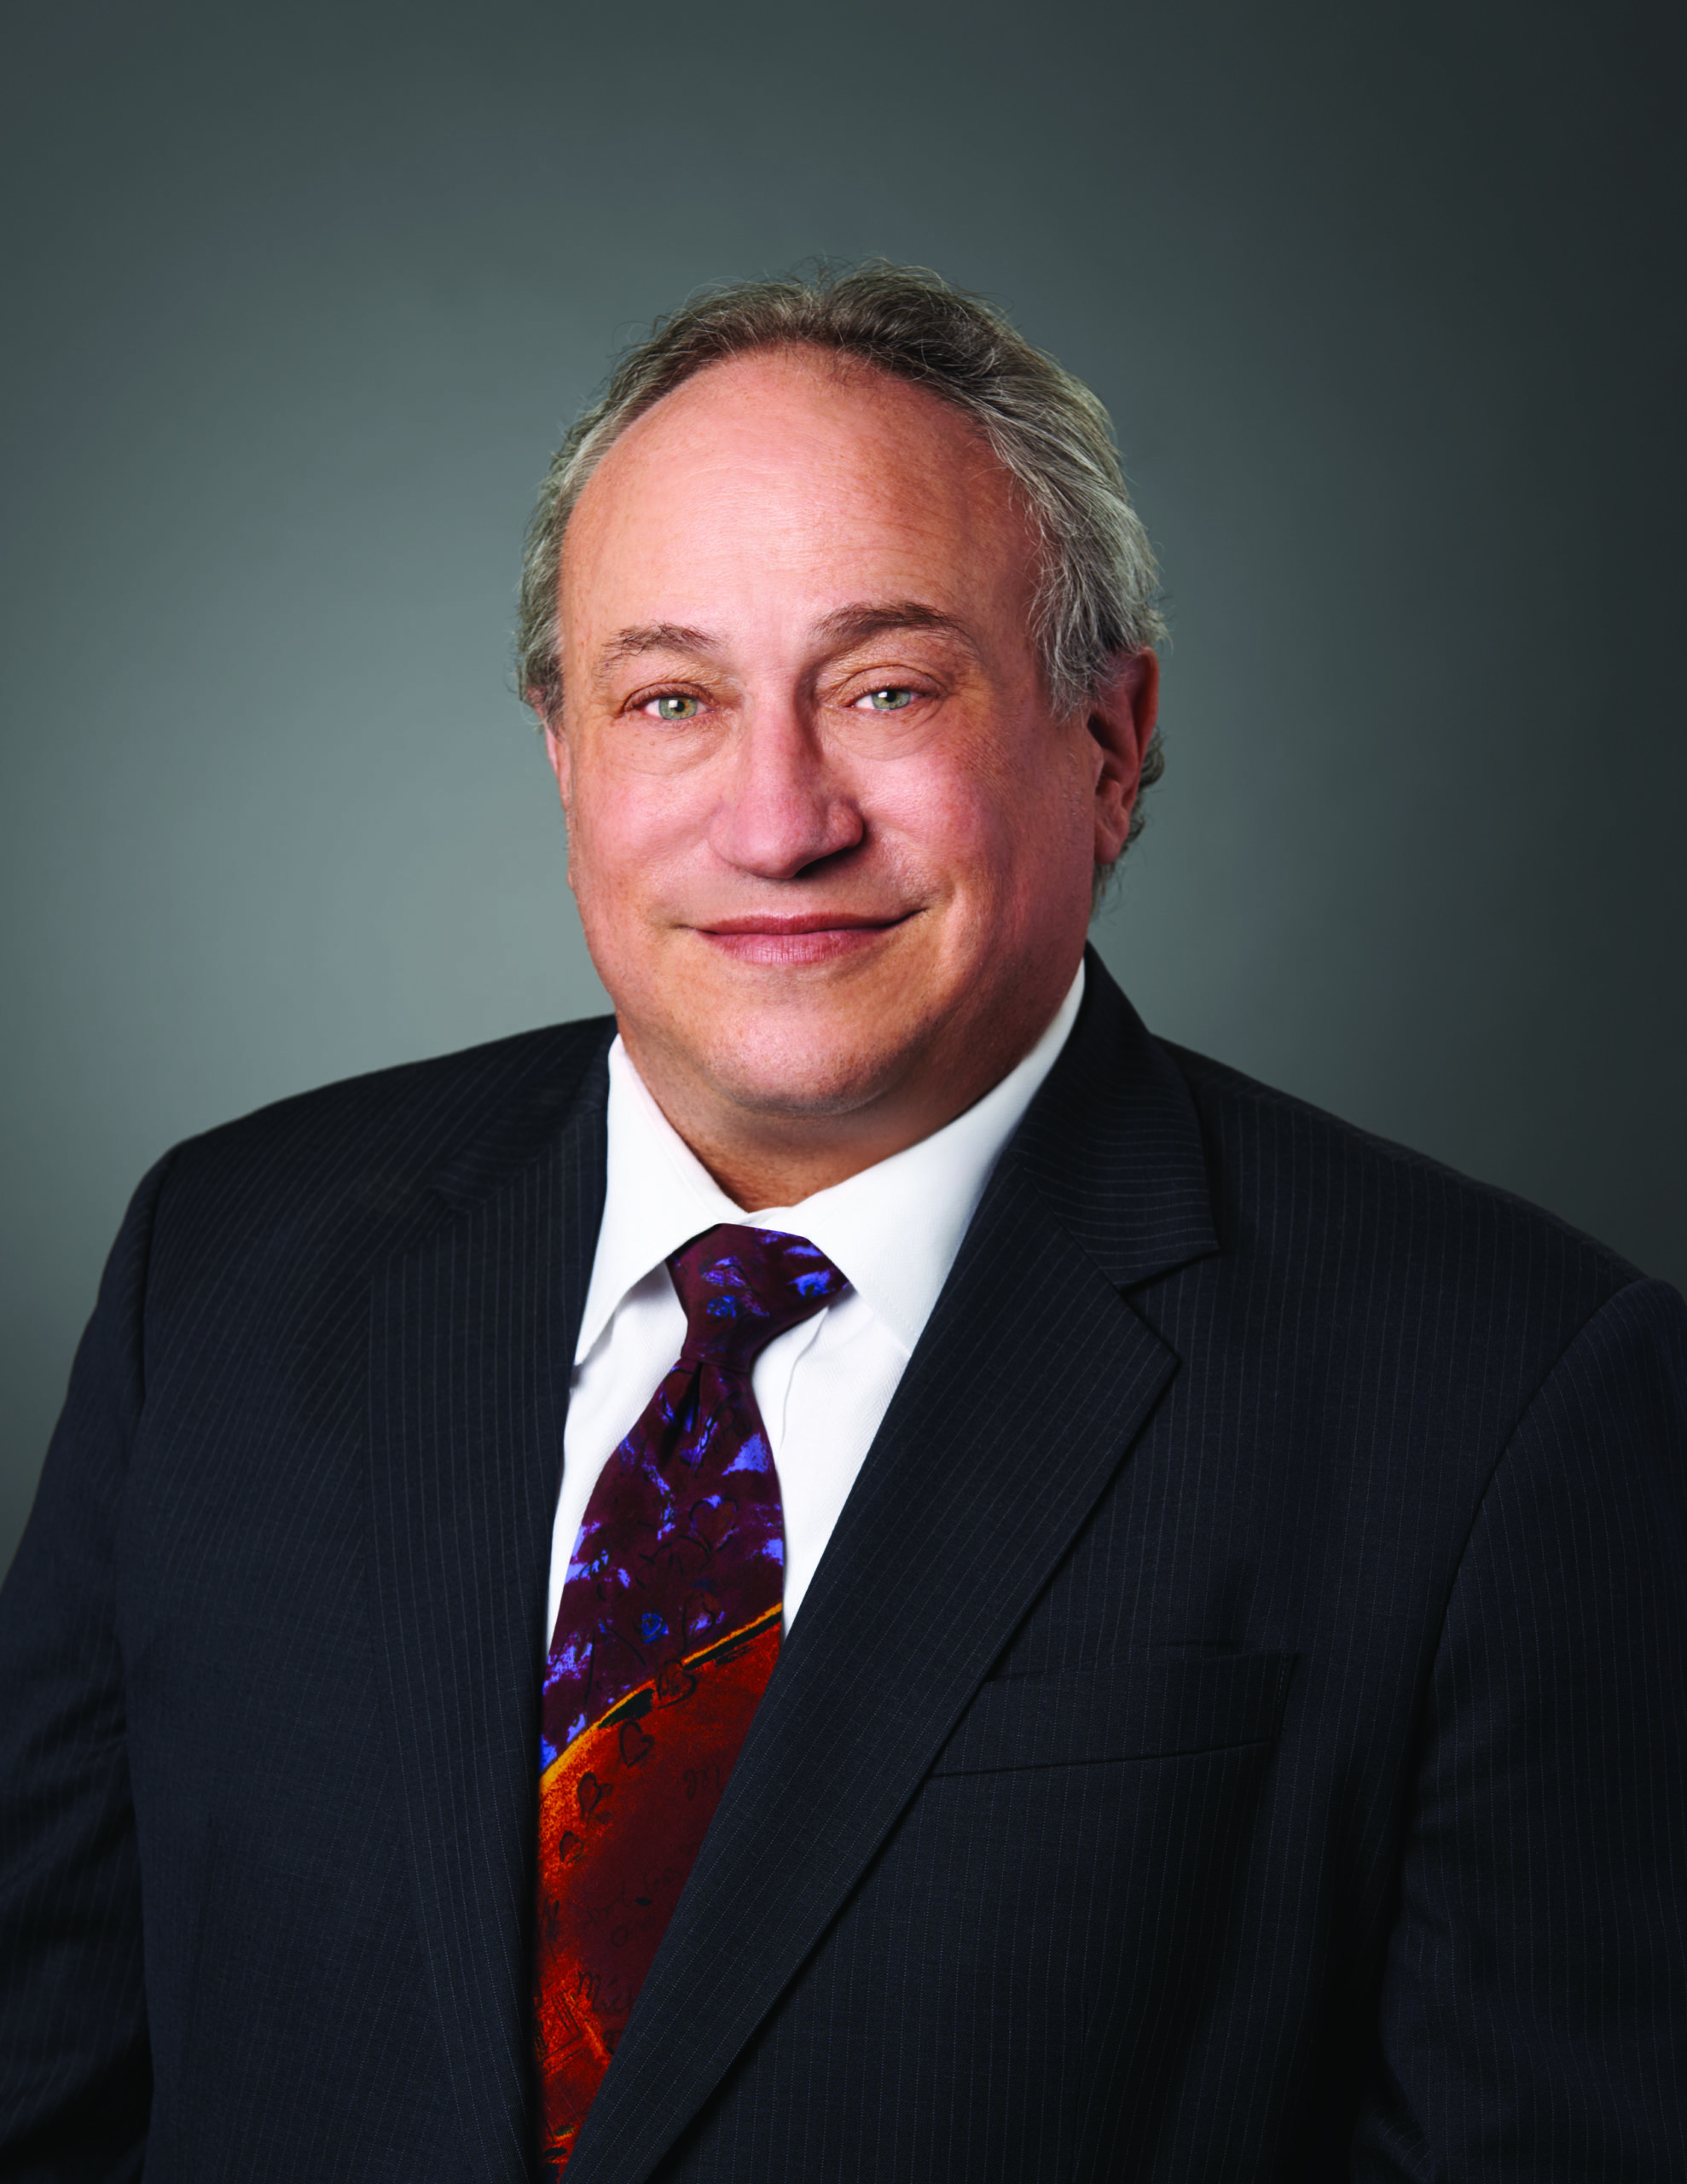 Stephen J. Silverberg has been selected by his peers for inclusion in 2019 Best Lawyers in America for Elder Law.